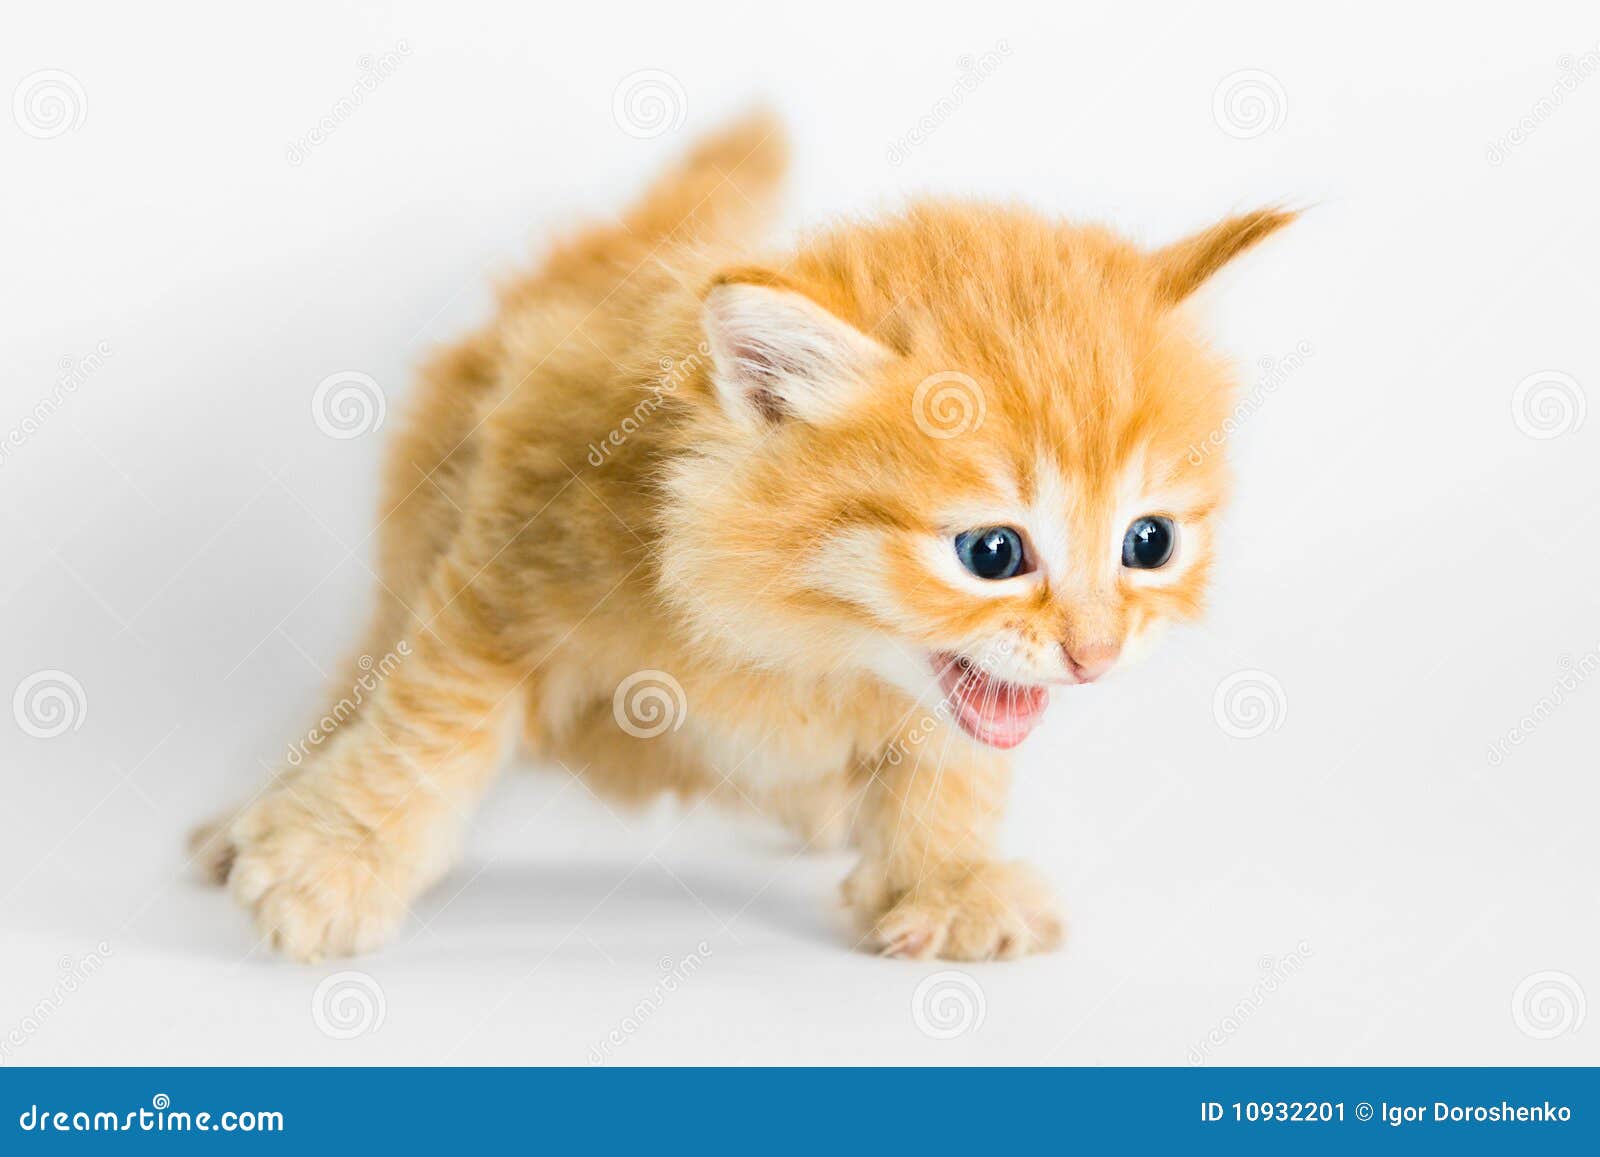 Cute Kitten Running and Meowing Stock Image - Image of baby ...